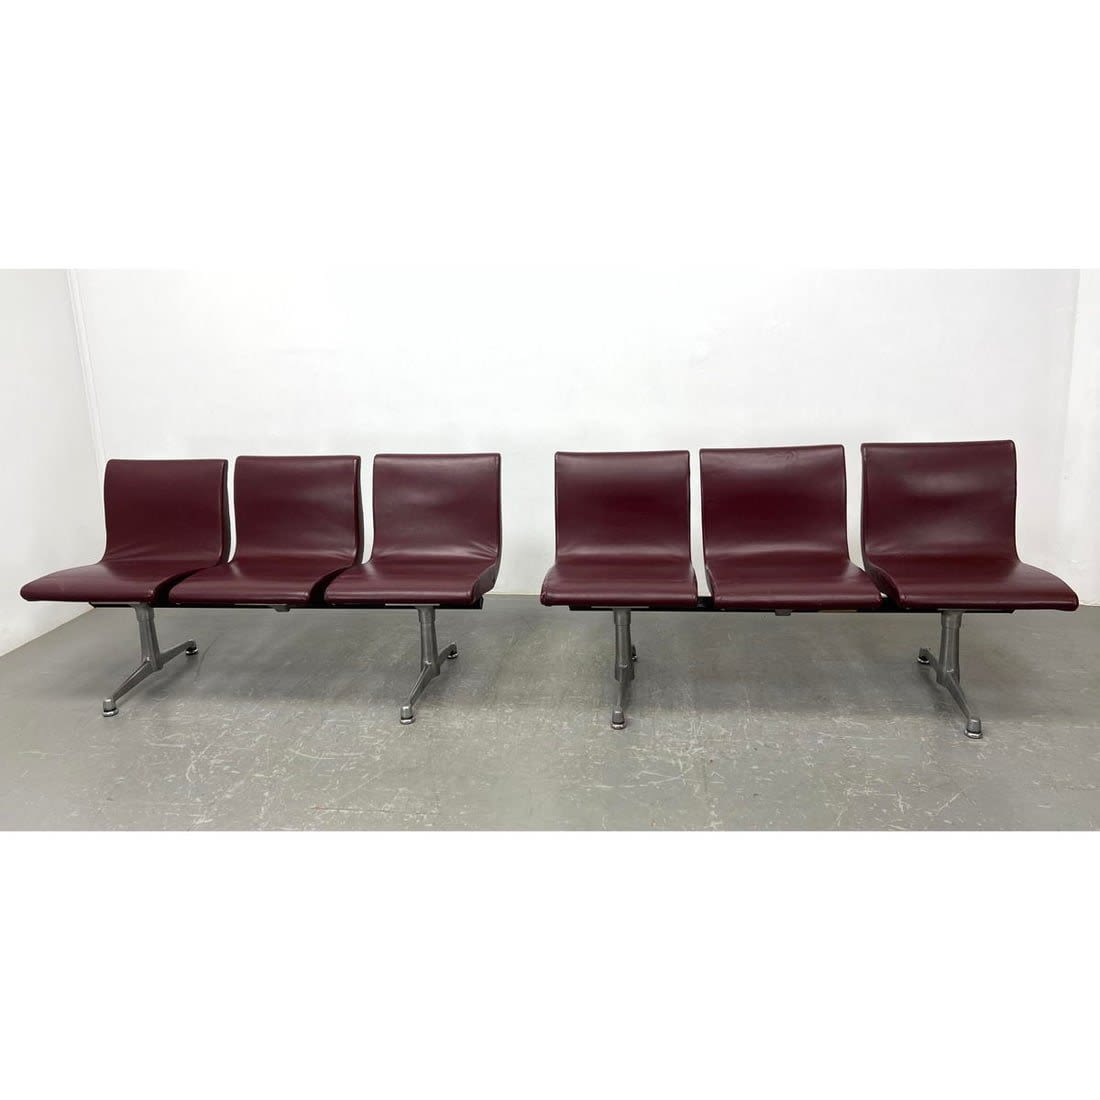 Pr Italy Modernist 3 Seater Commercial